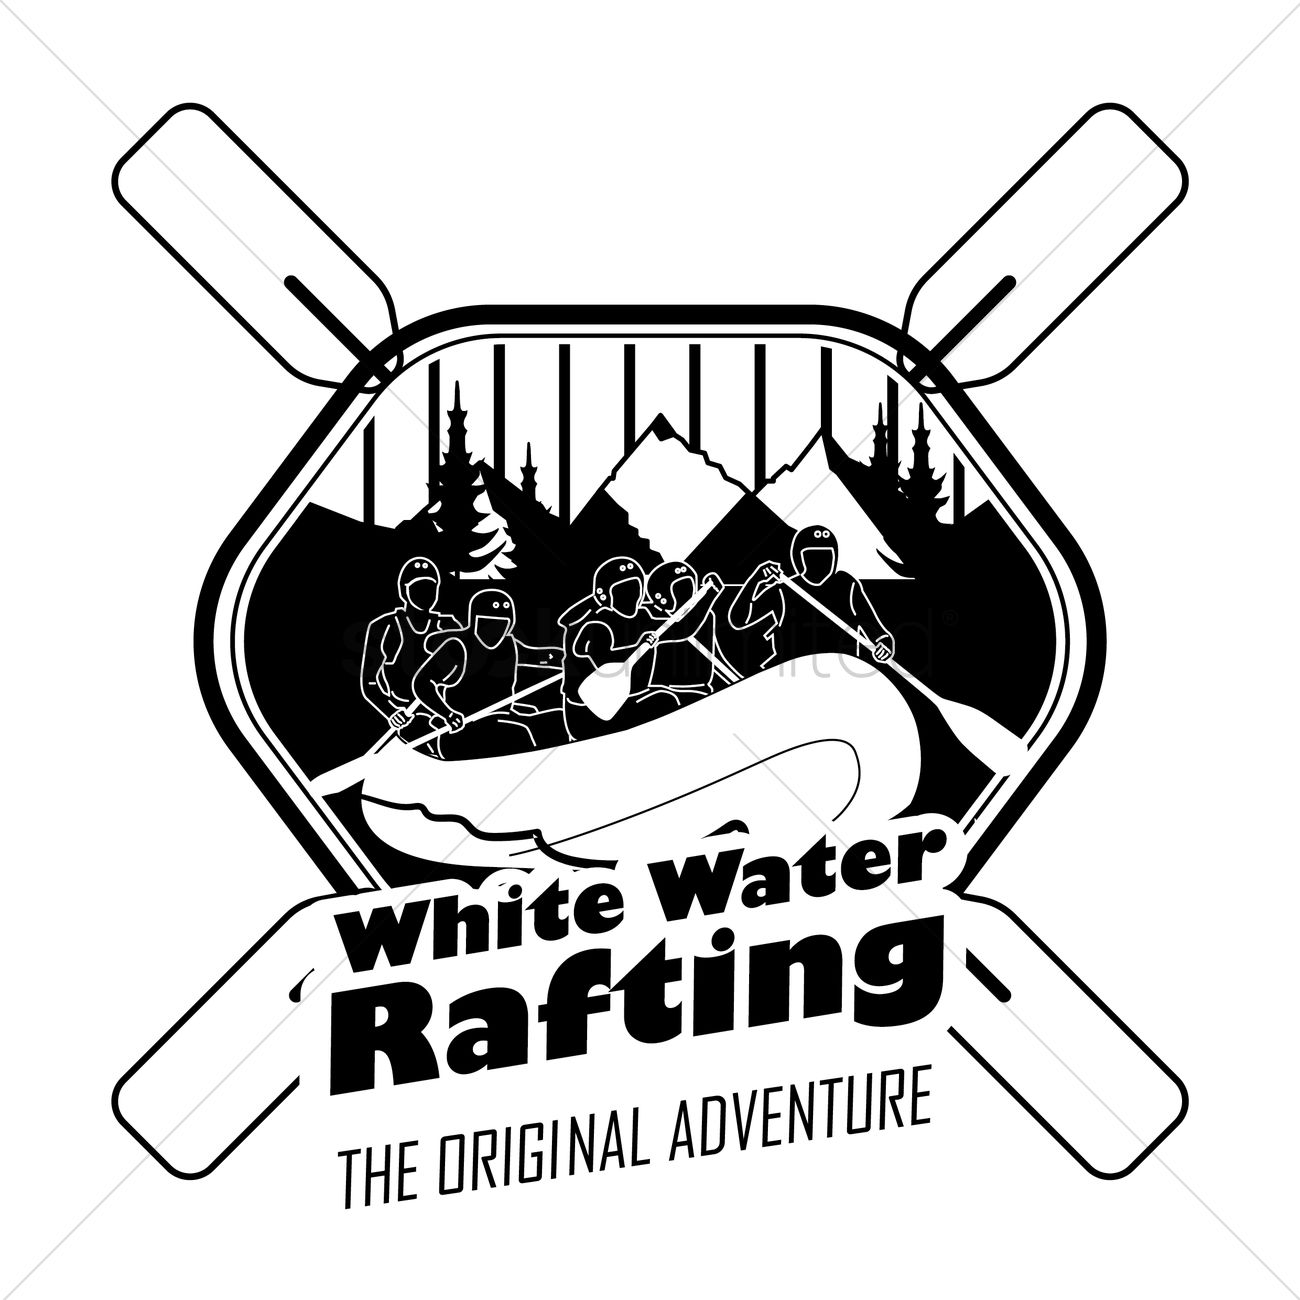 White water rafting label Vector Image.